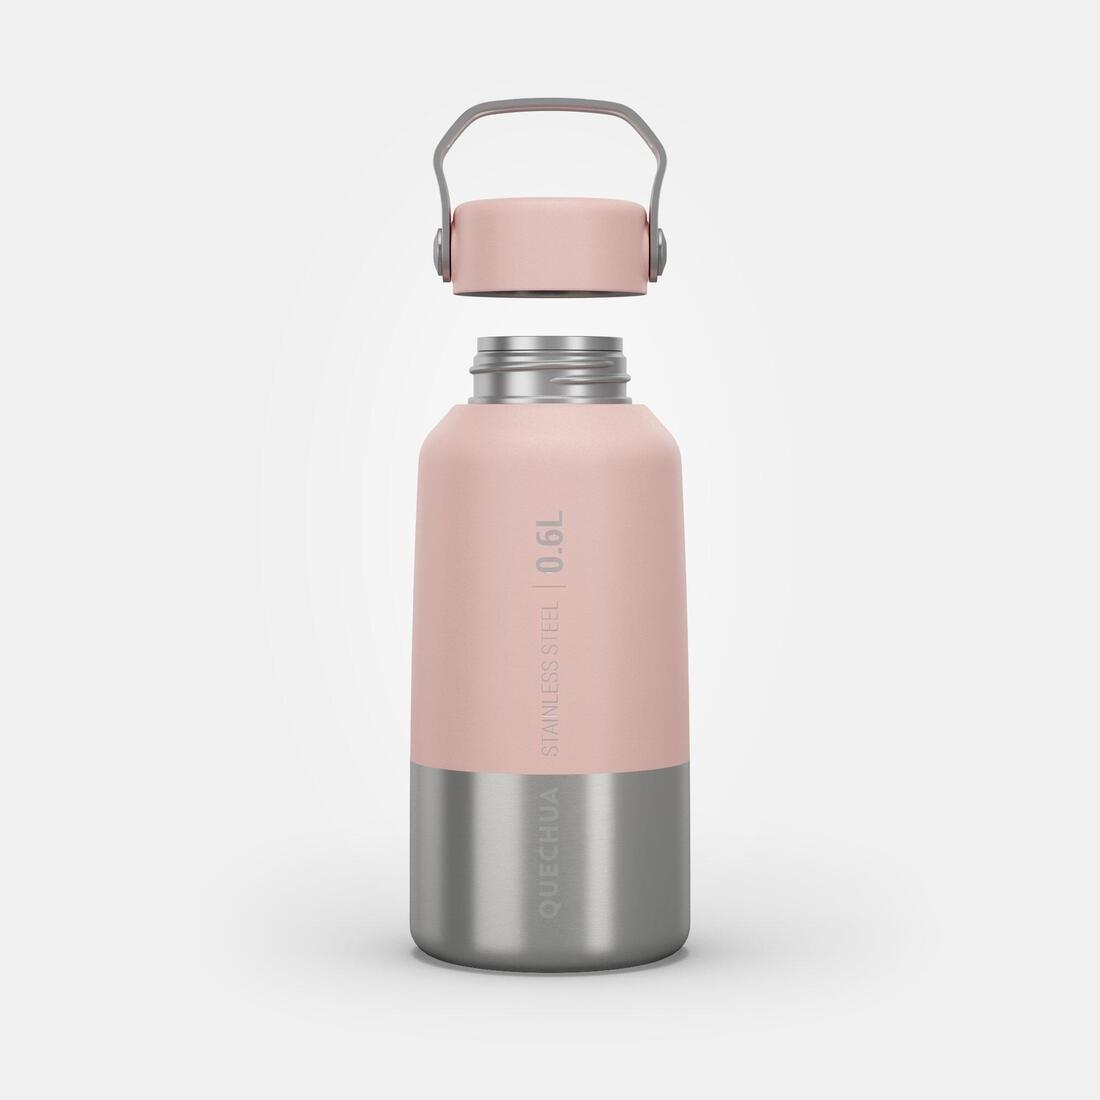 QUECHUA - Stainless Steel Hiking Flask With Screw Cap Mh100 0.6 L, Pink